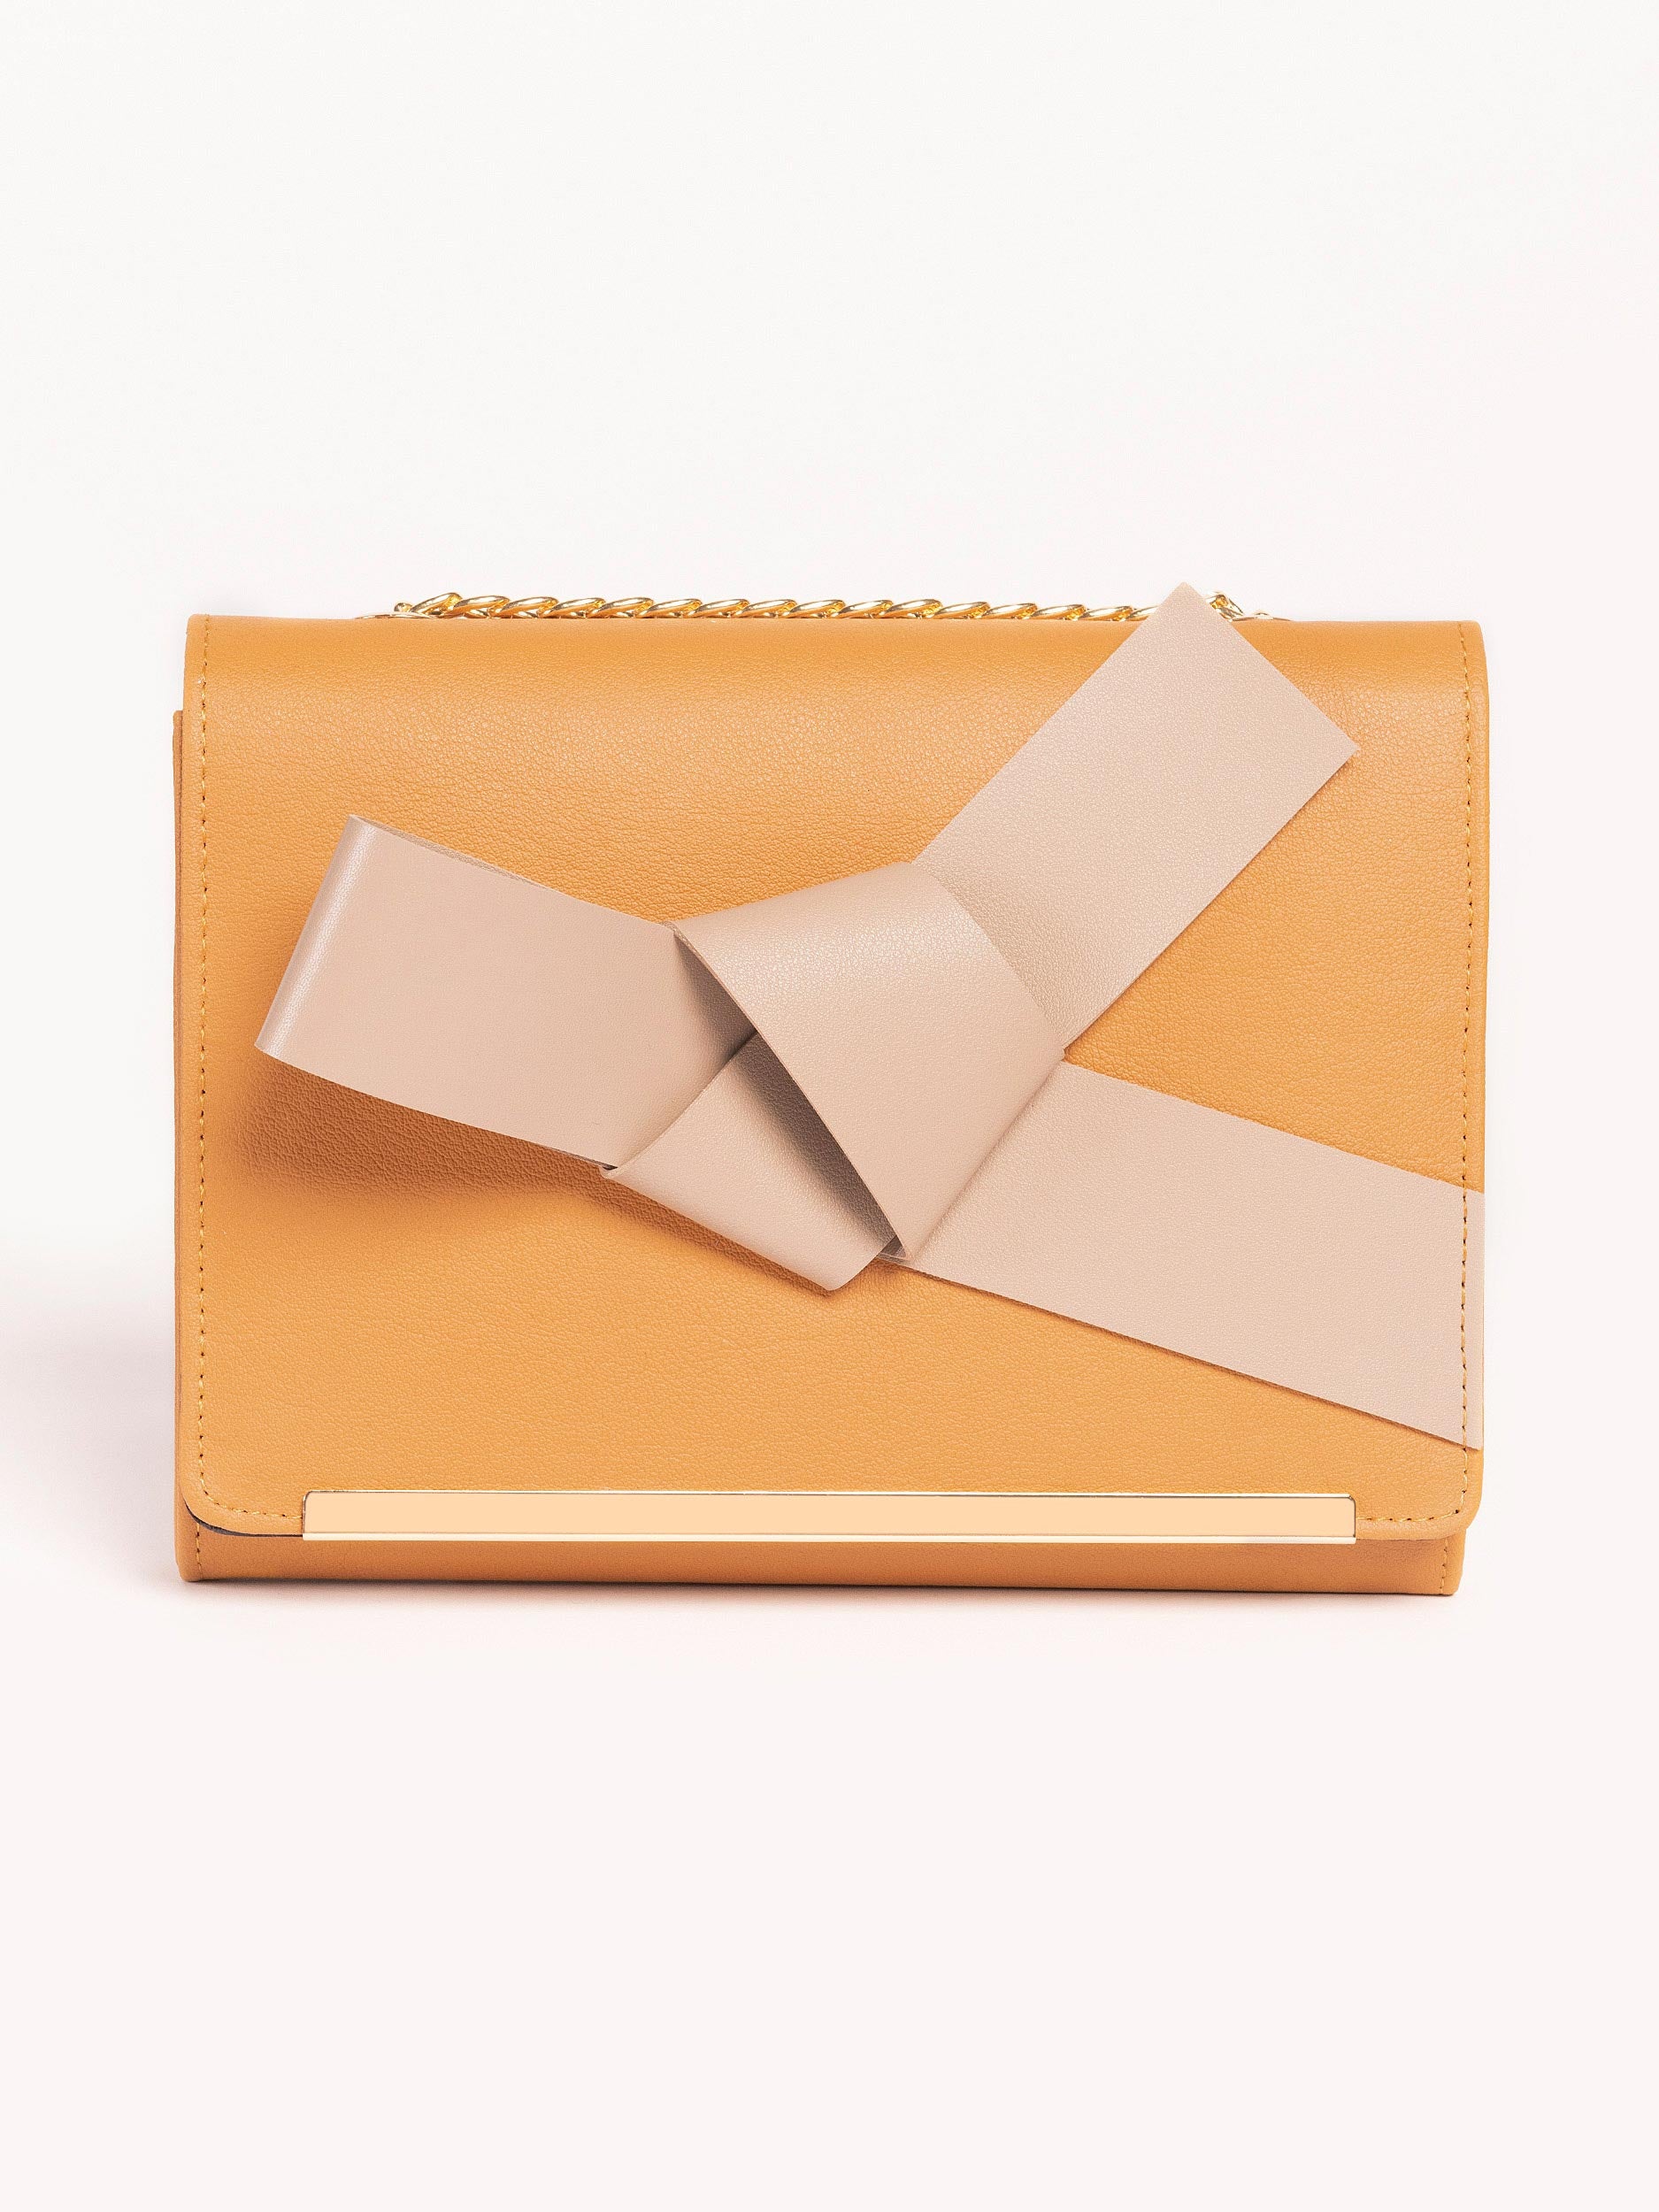 knotted-clutch-bag